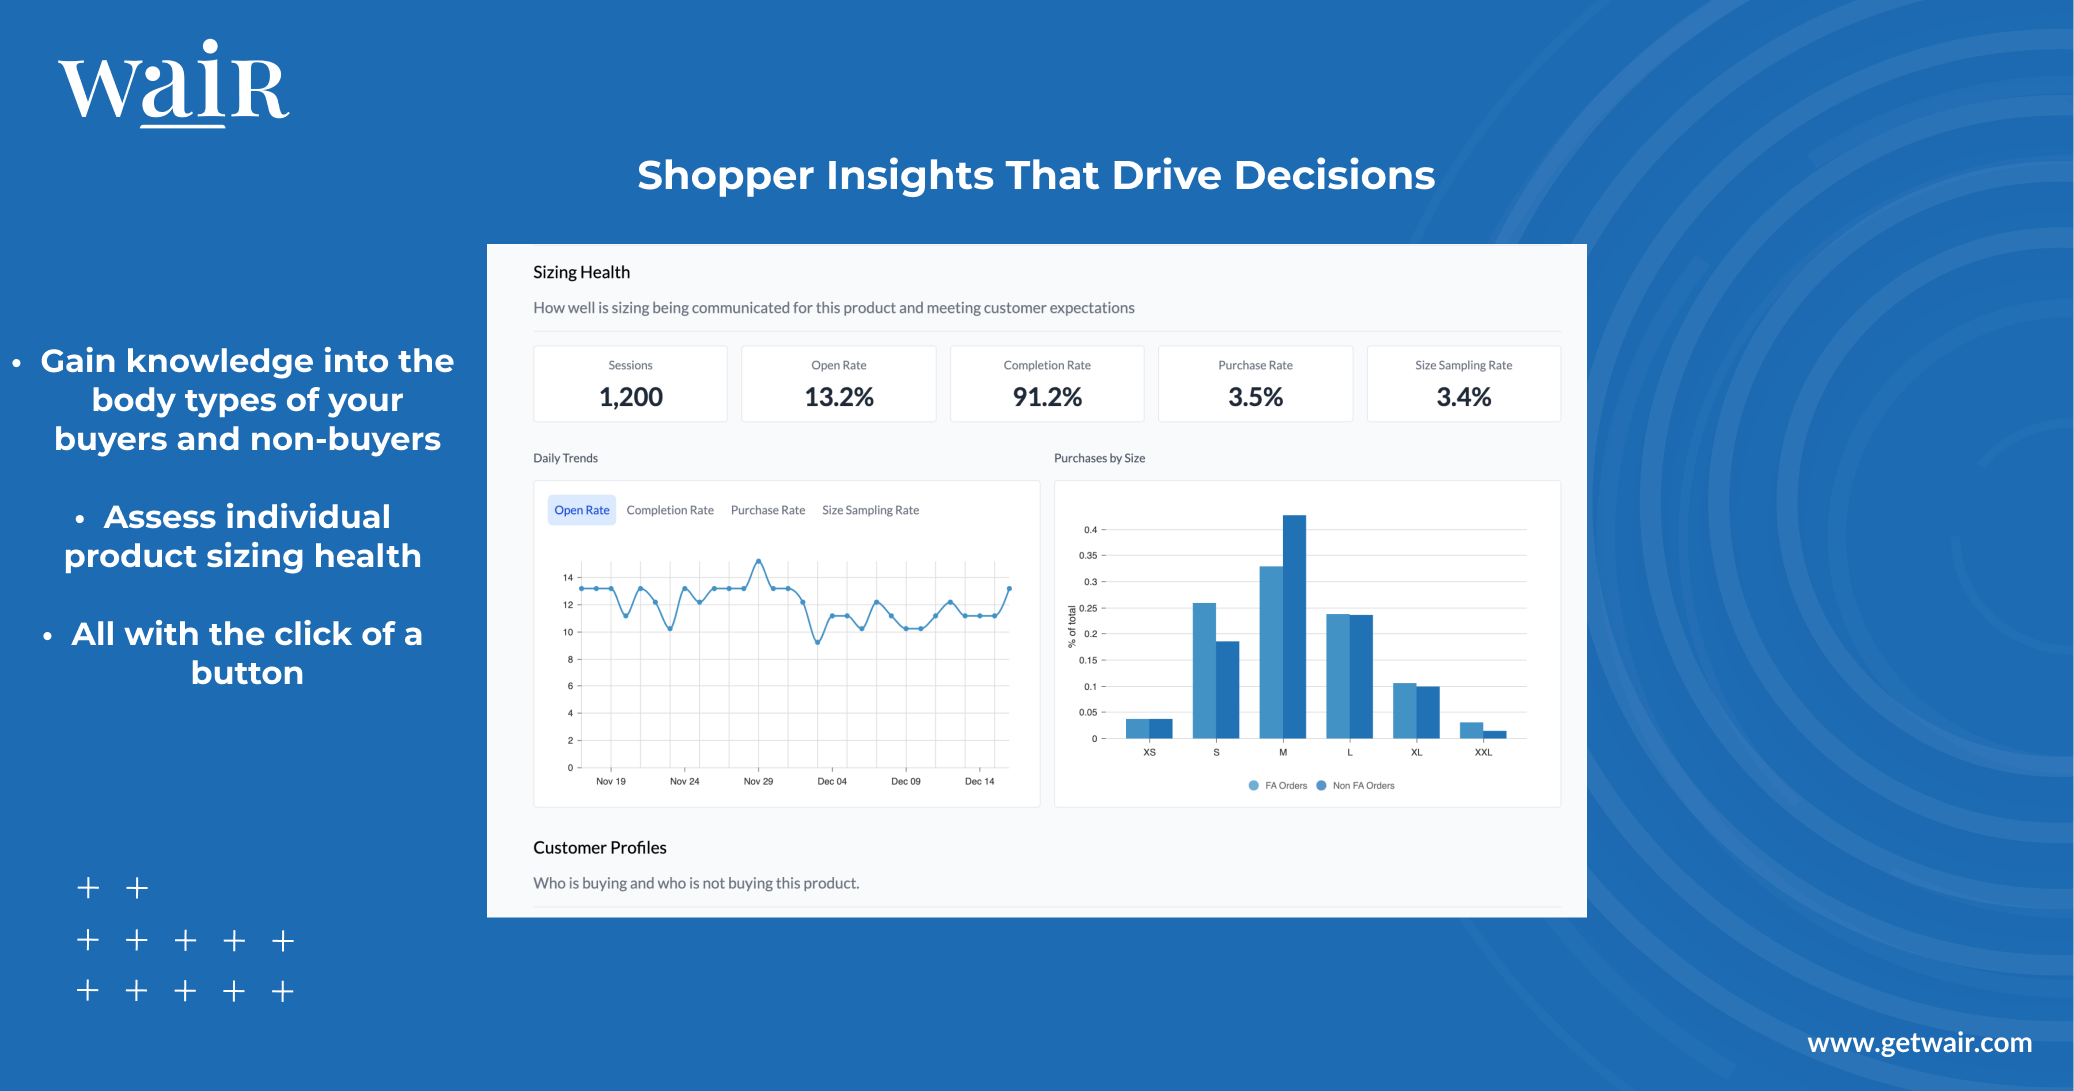 WAIR's Product Insights dashboard